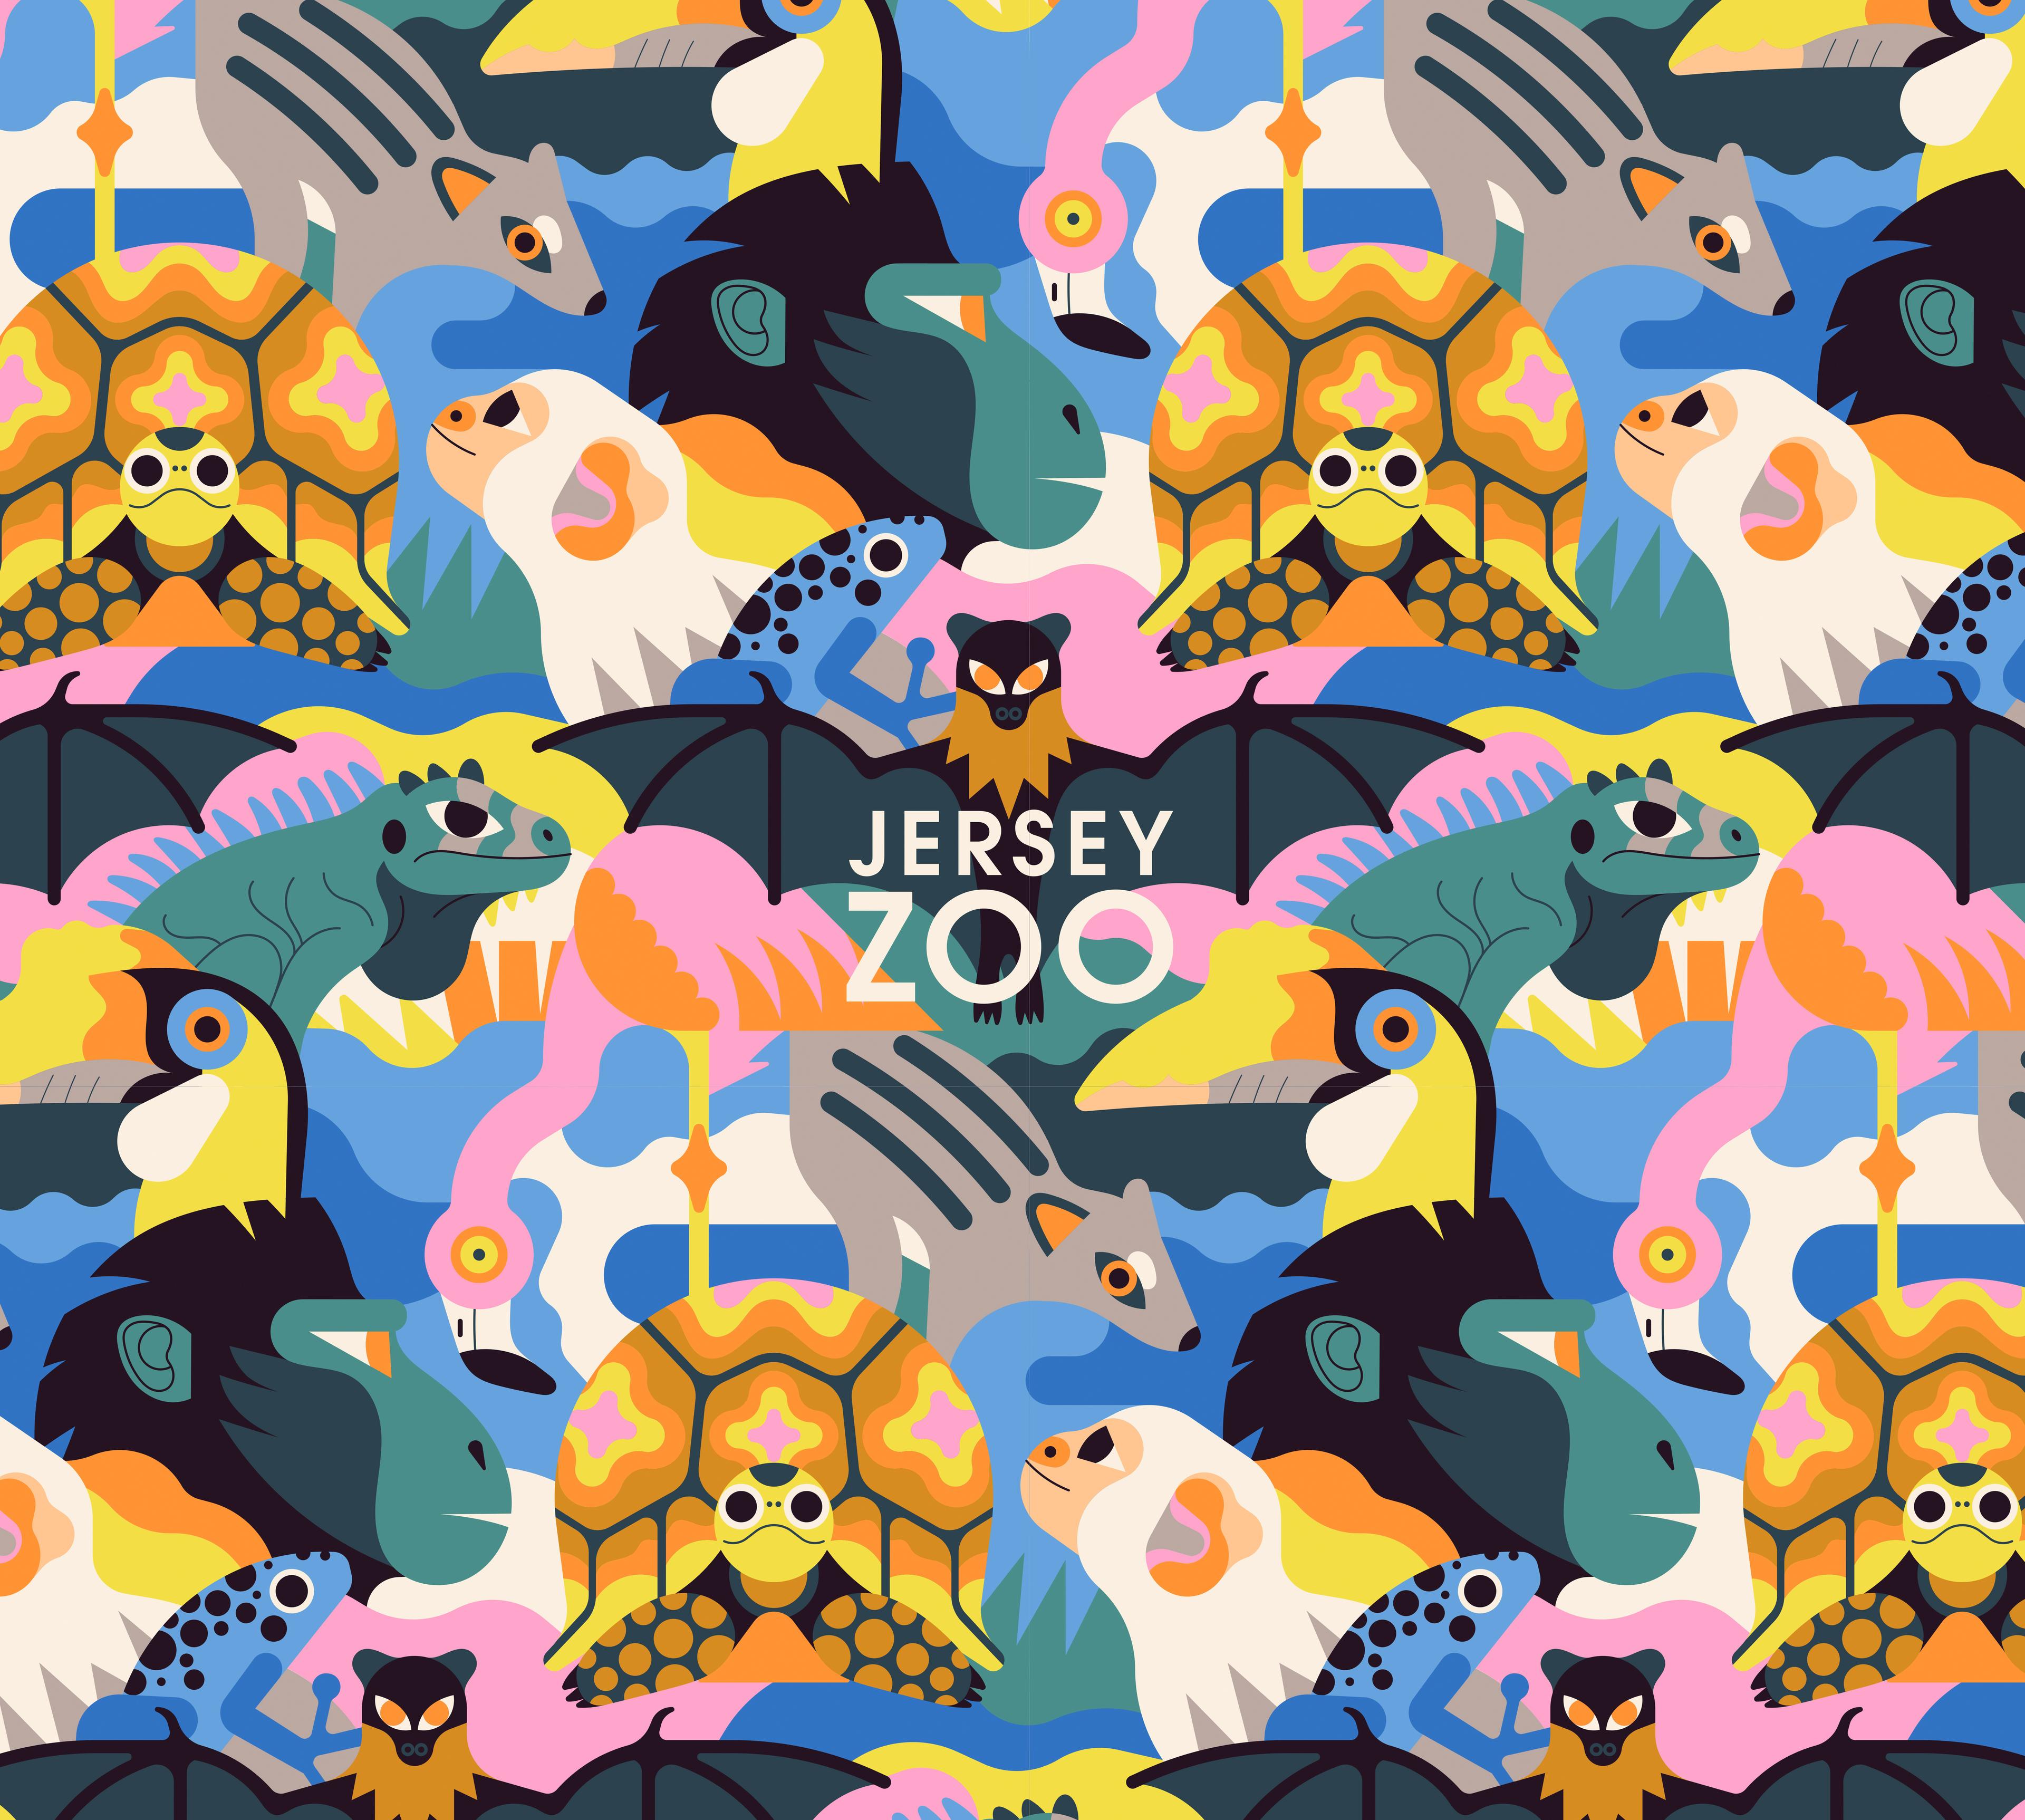 A bold illustrated pattern featuring an array of animals and birds including toucans, monkeys, turtles, bats and others. In the center, we can see the words 'Jersey Zoo' in a clean sans serif font.